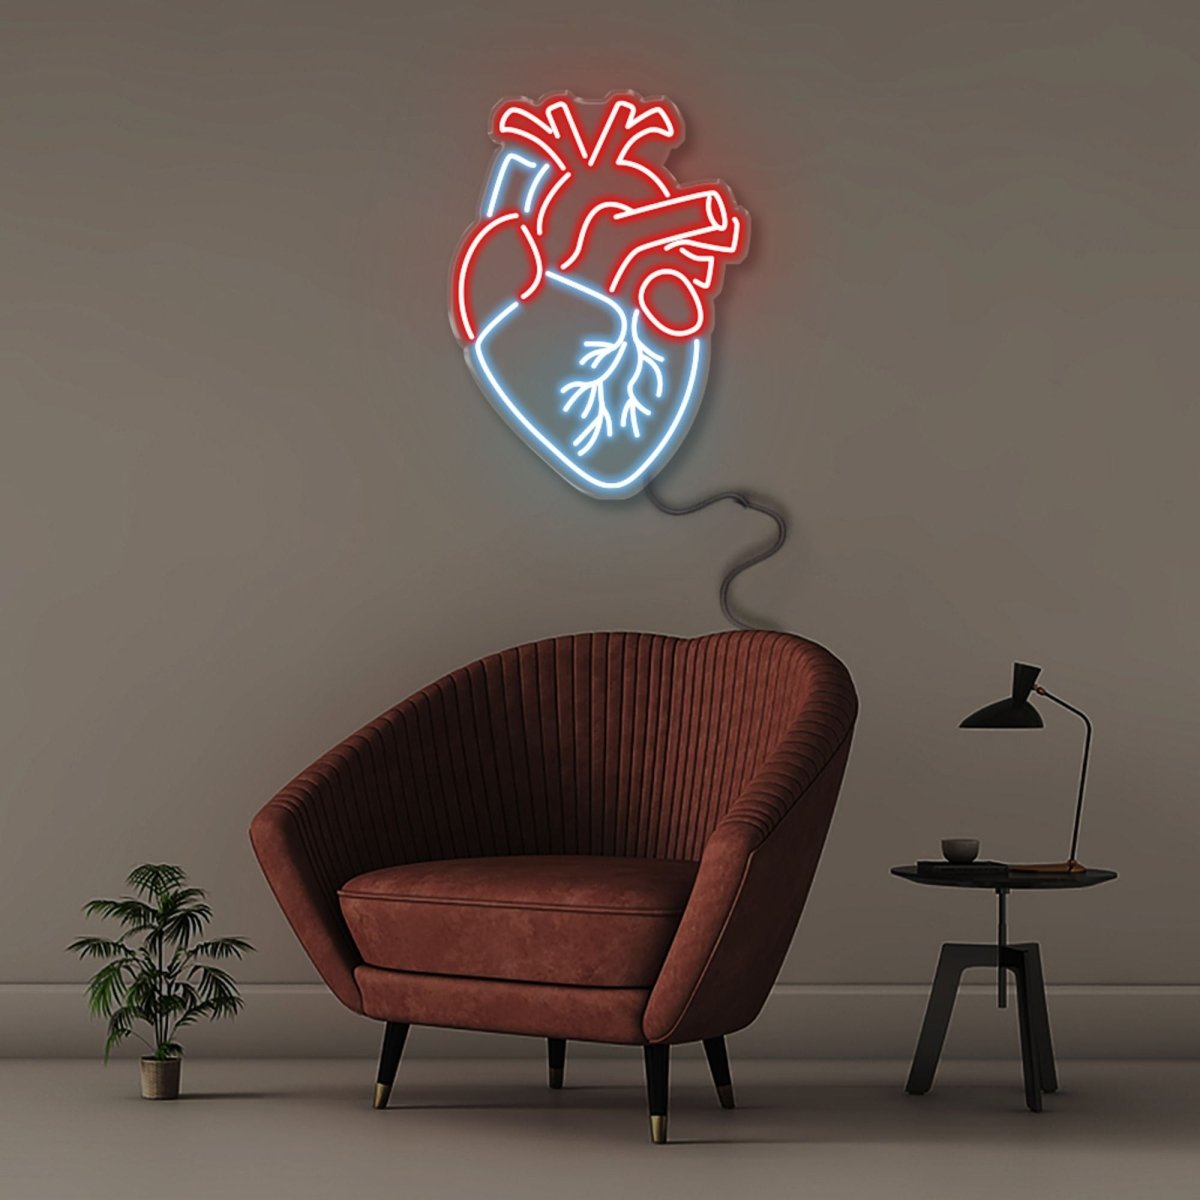 Anatomical Heart - Neonific - LED Neon Signs - 61cm (24") -